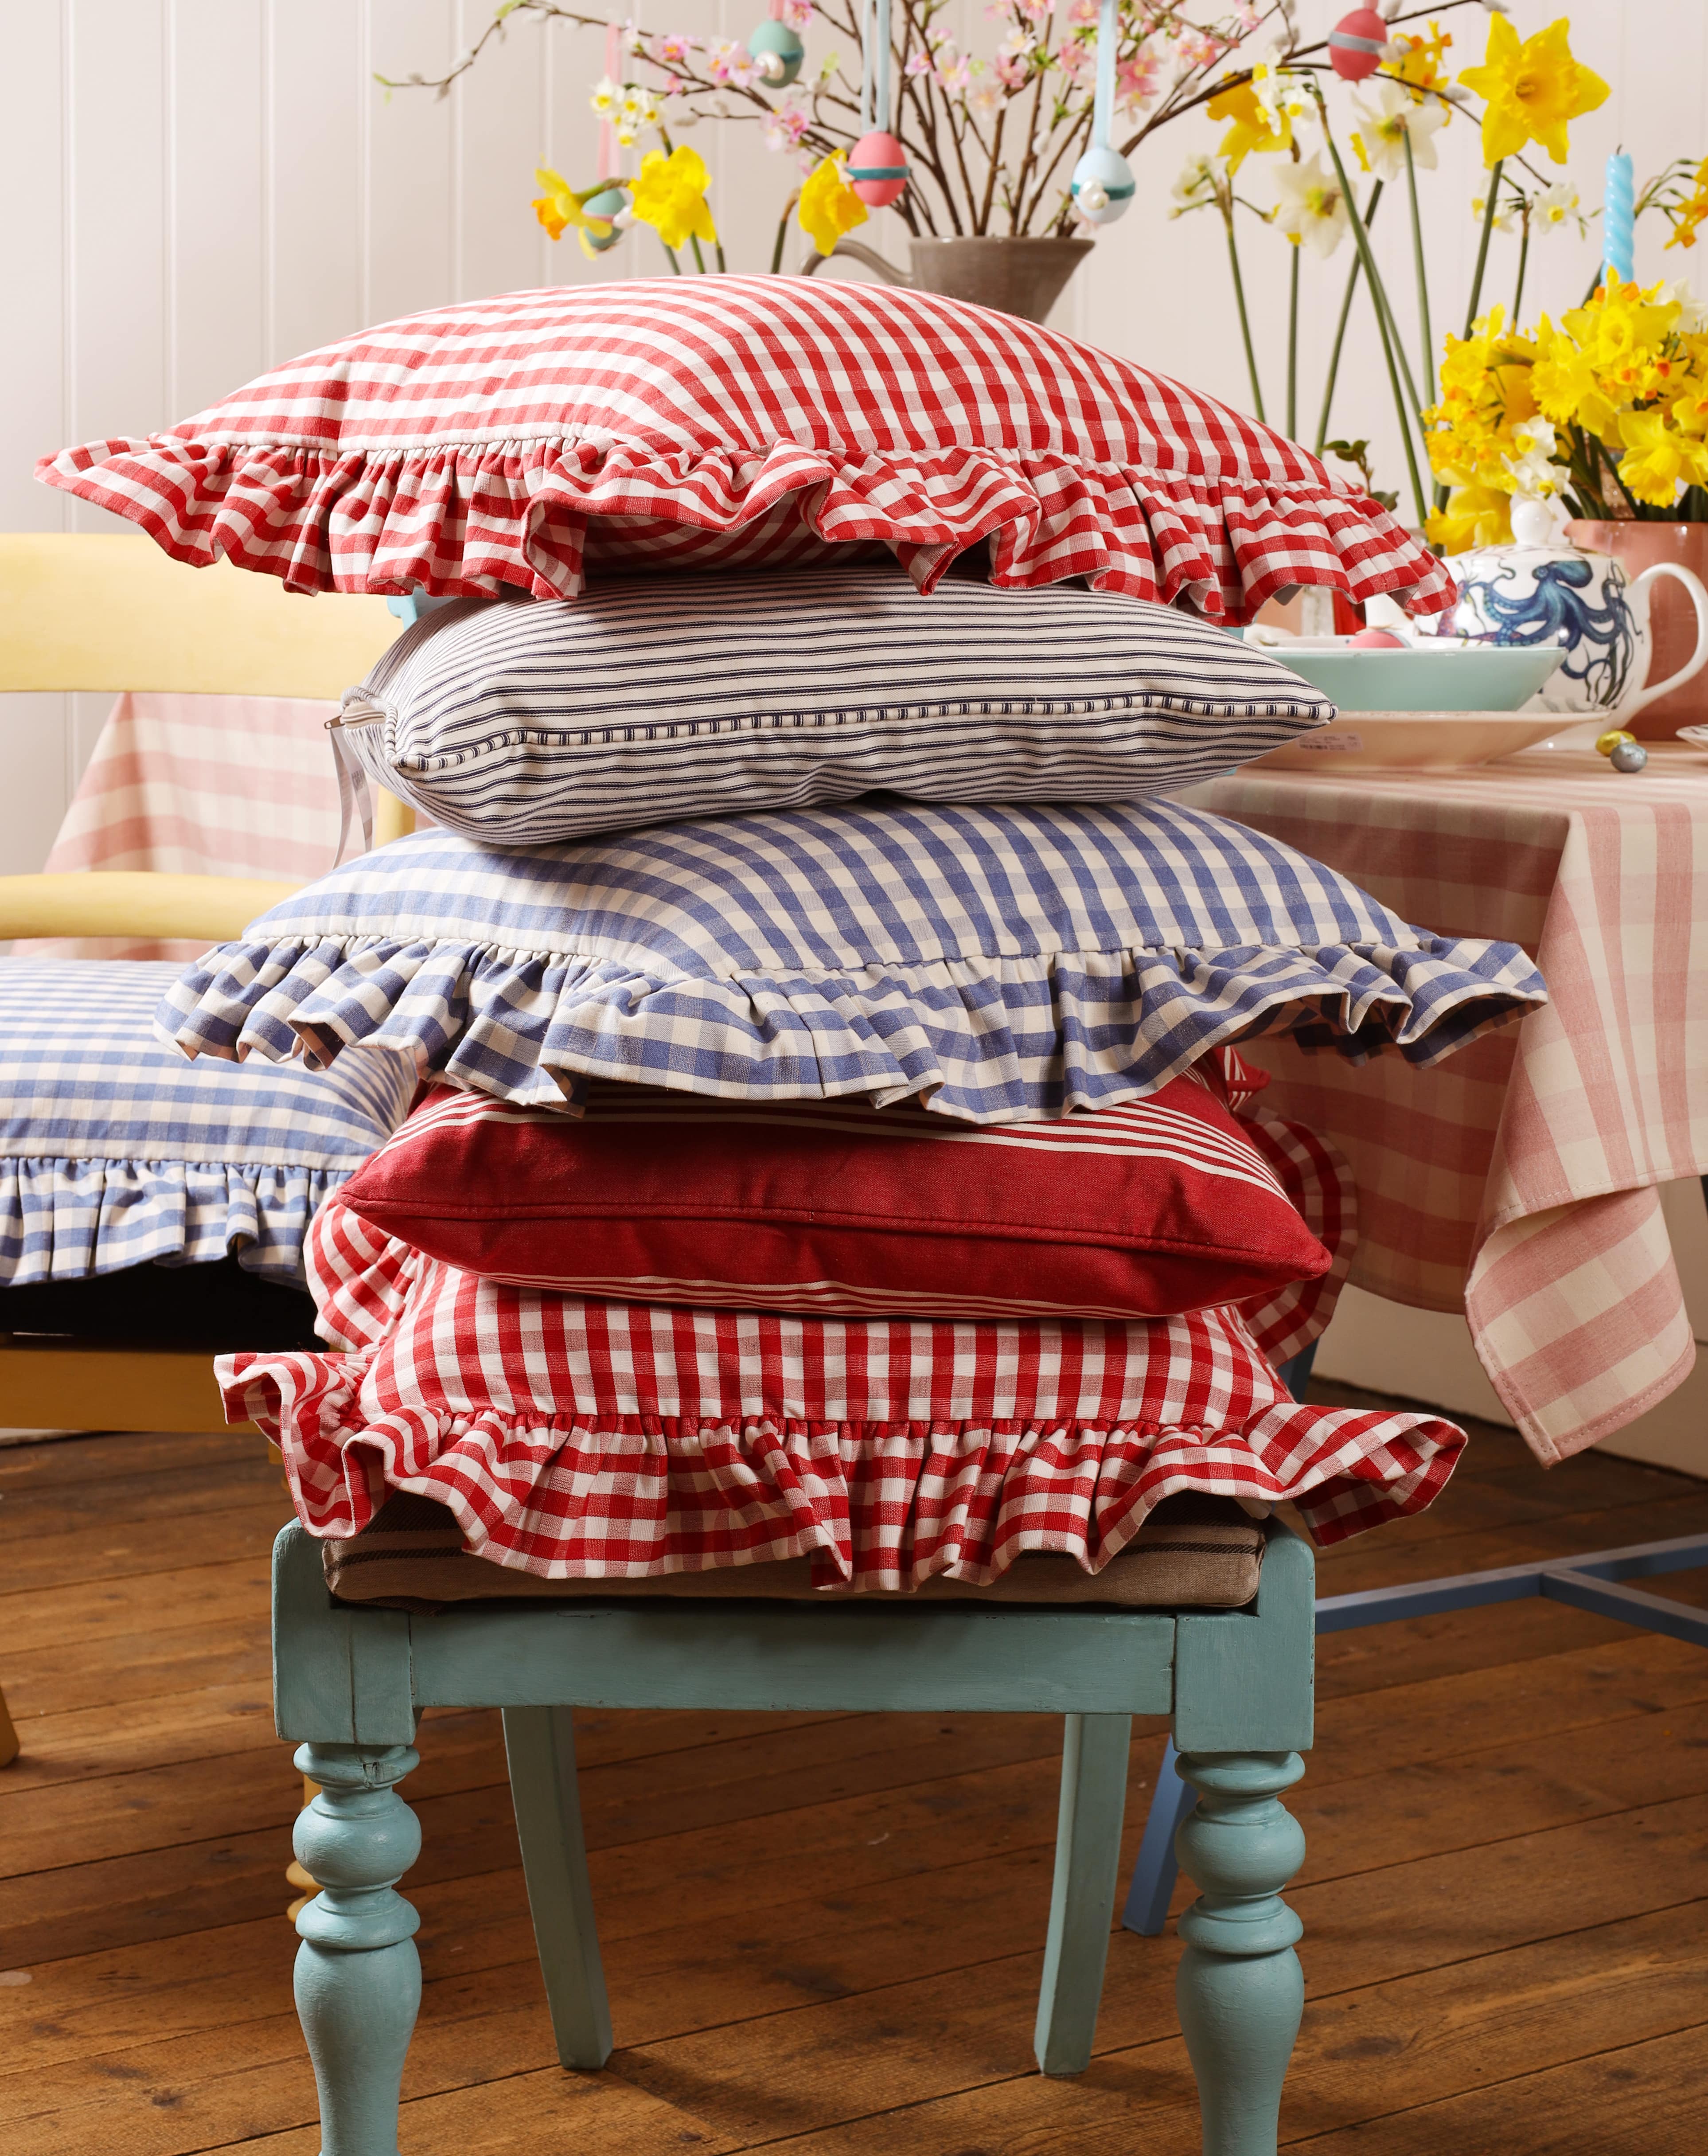 Red Gingham cushion on top of a blue gingham ,red striped,Navy striped pile of cushions in front of a table decorated with cakes and flowers.